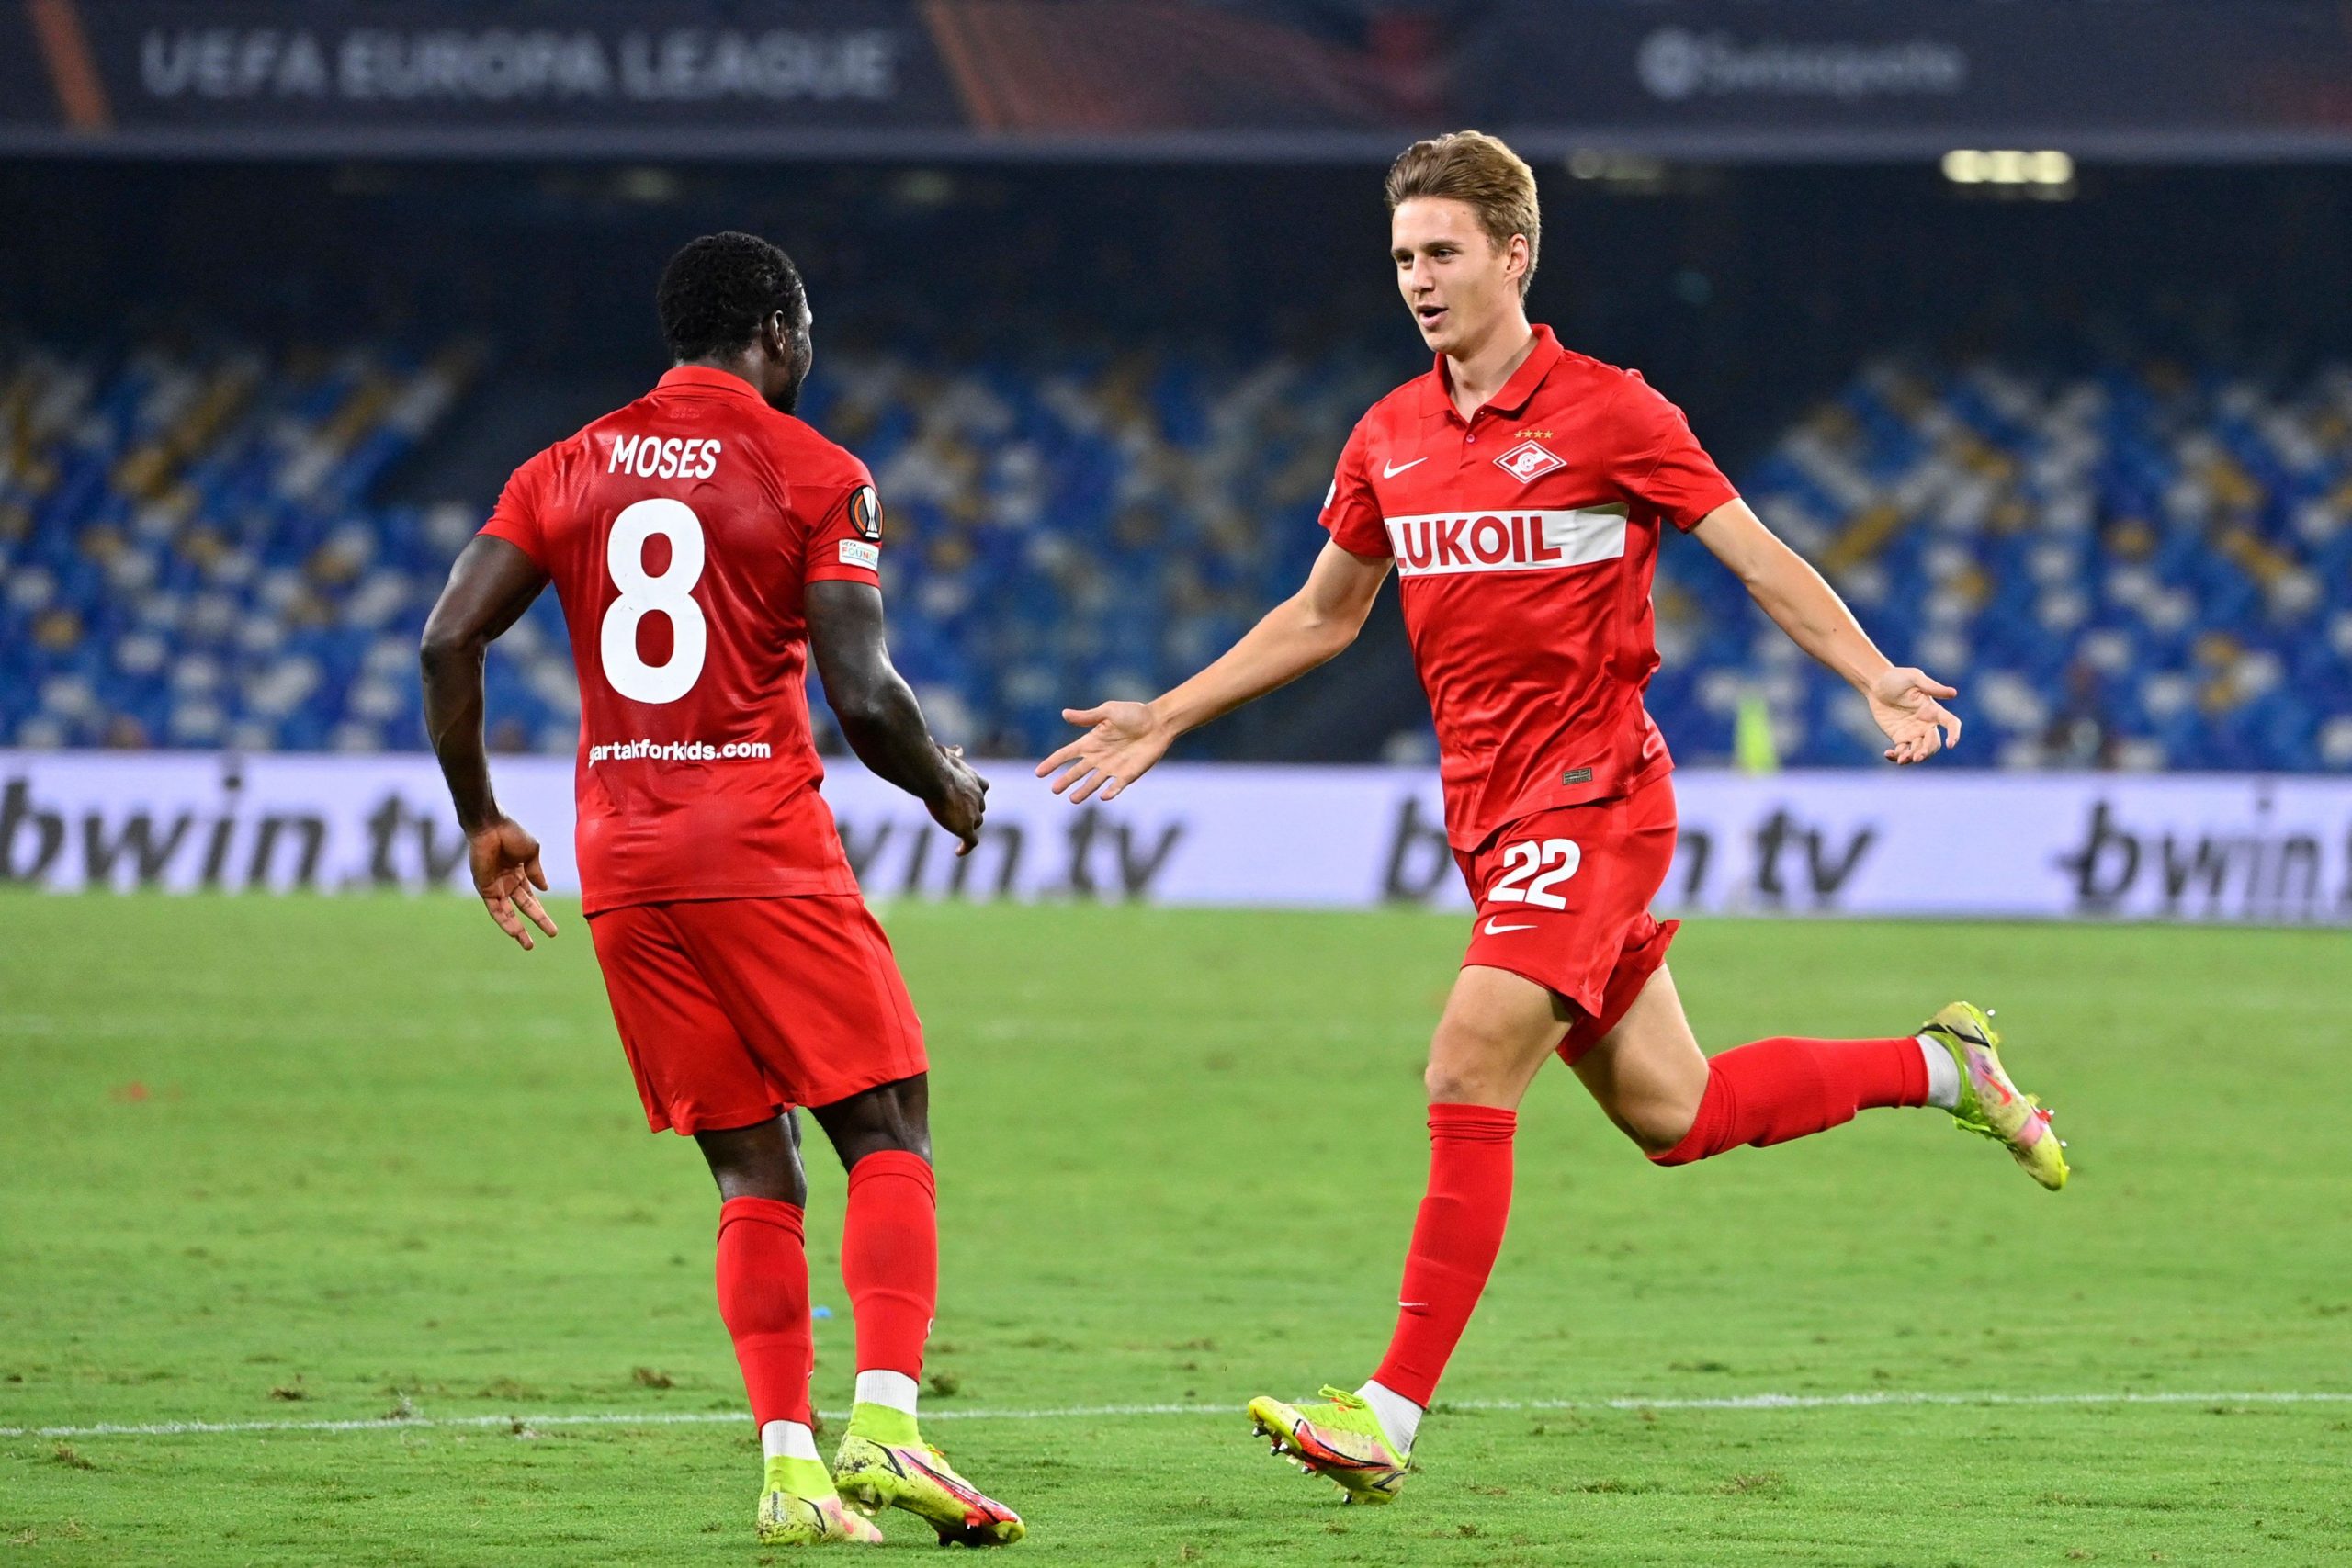 Europa League: Spartak Moscow rallies to shock victory over Napoli